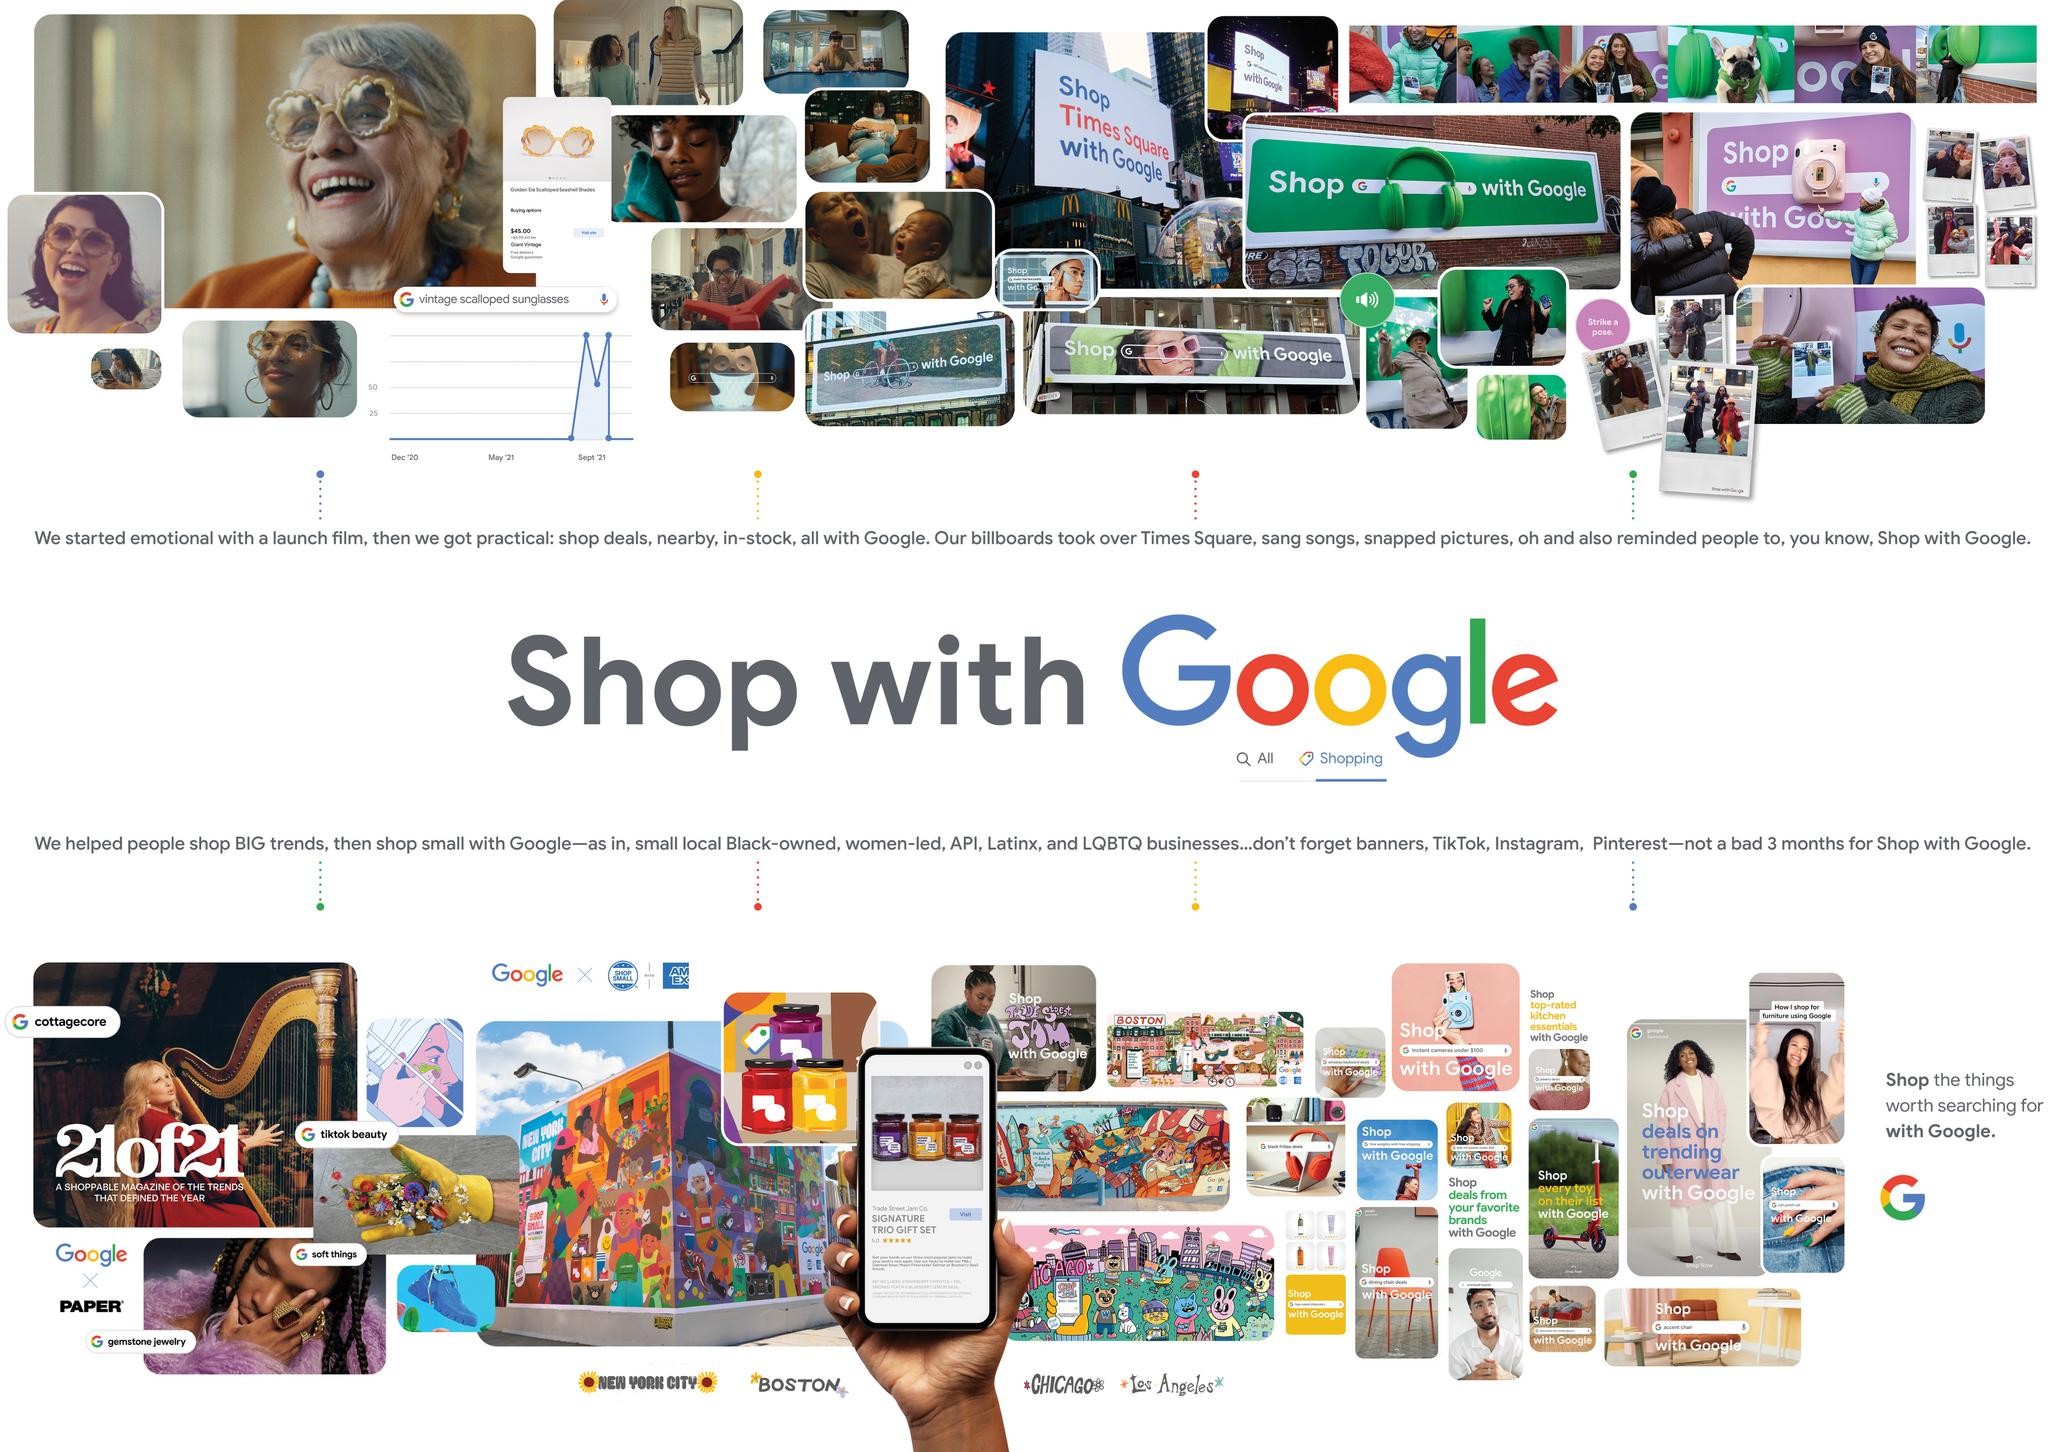 Google Shopping 360 Campaign